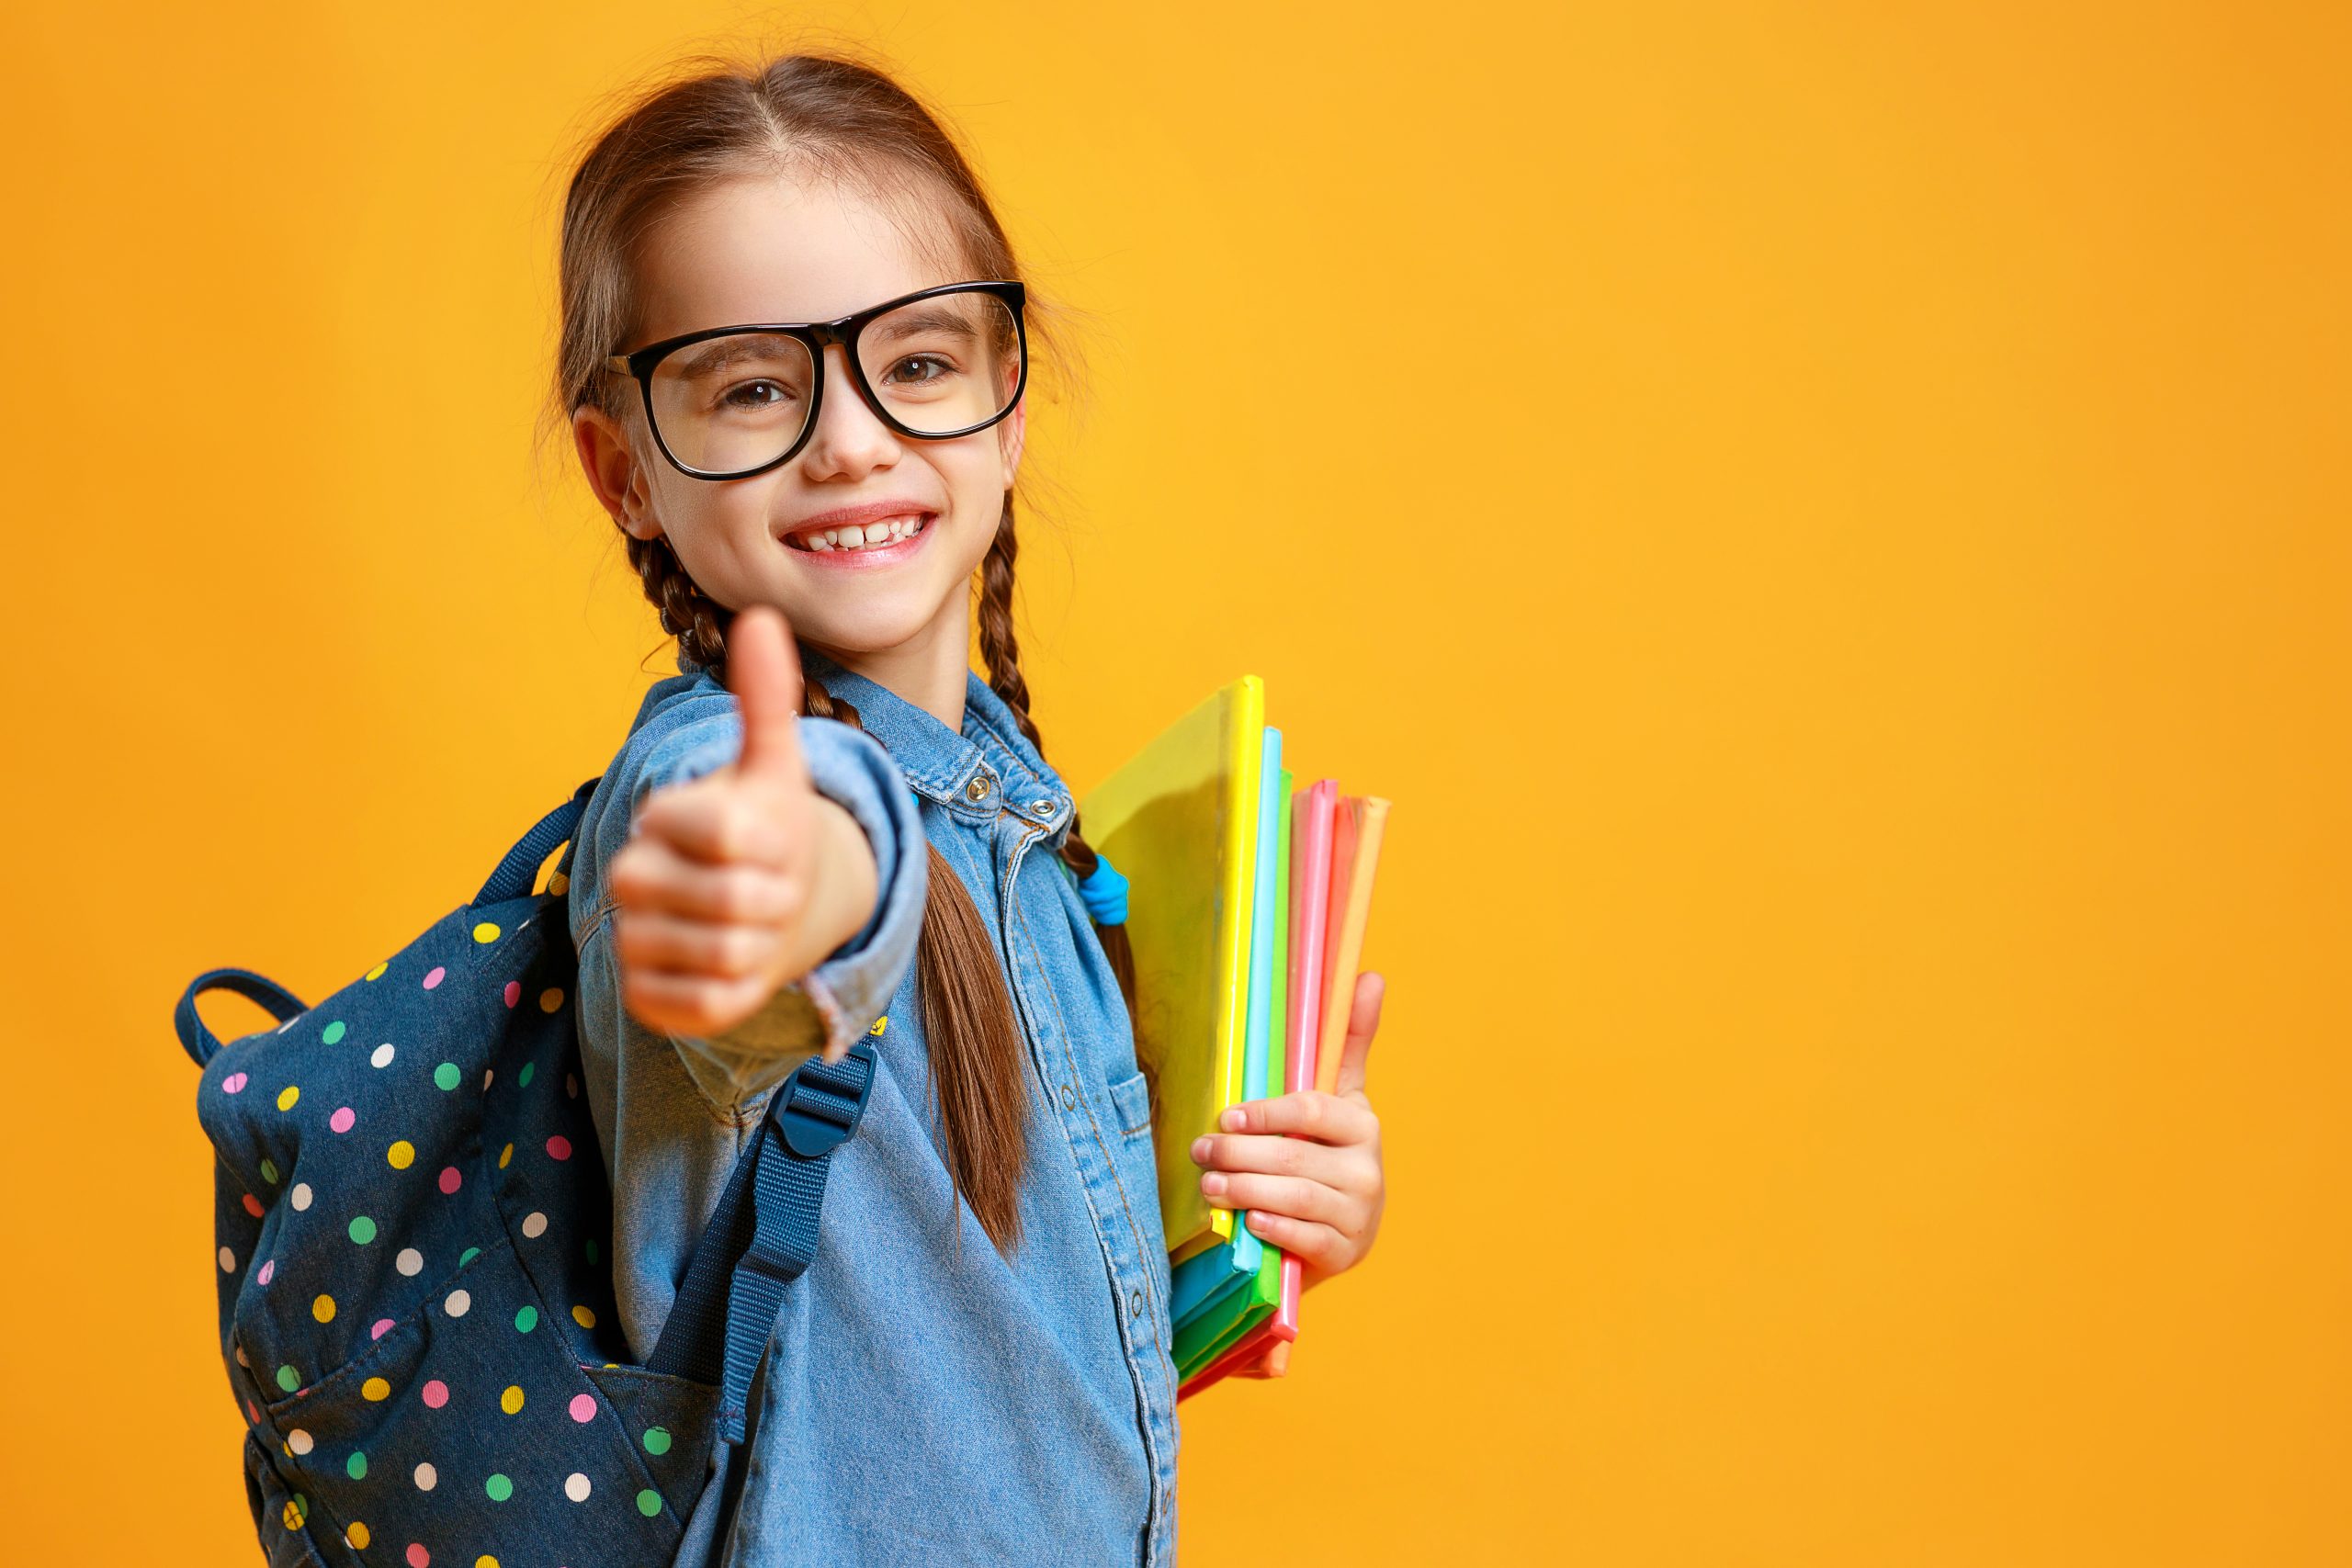 Child giving thumbs up with packback on ready to go back to school